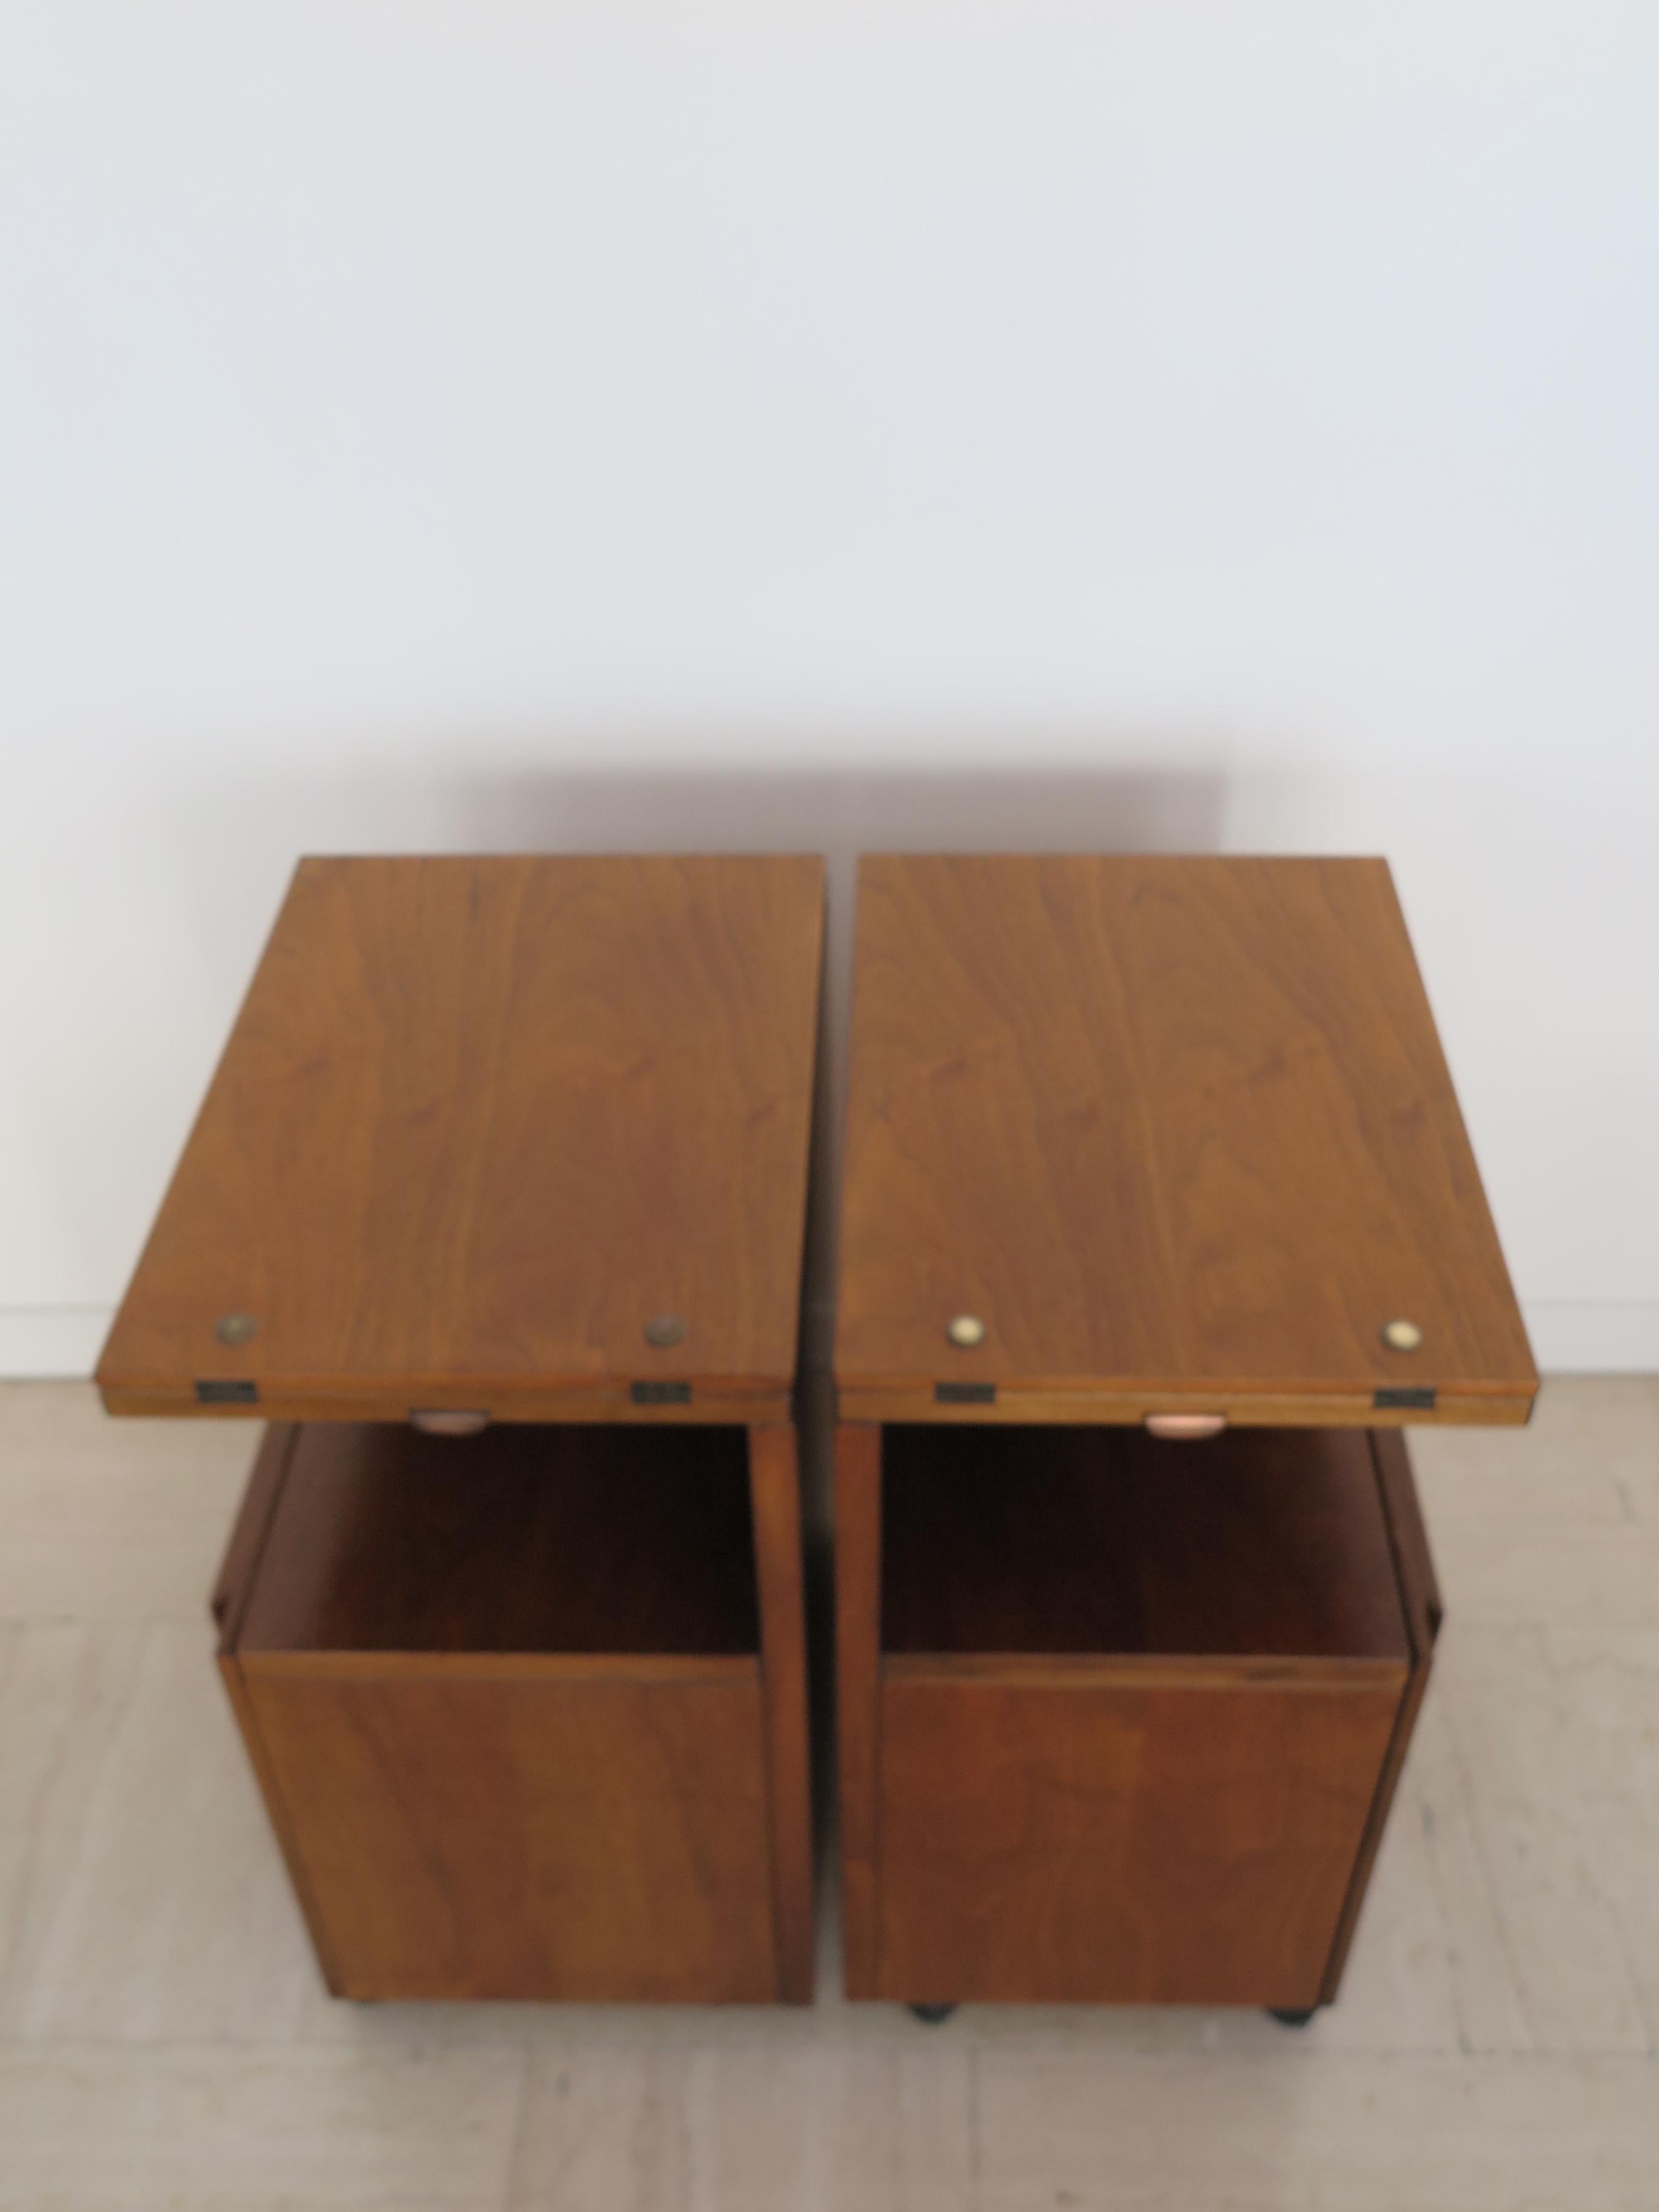 Giovanni Michelucci Poltronova Italian Wood Bedside Tables Nithg Stands 1960s For Sale 7